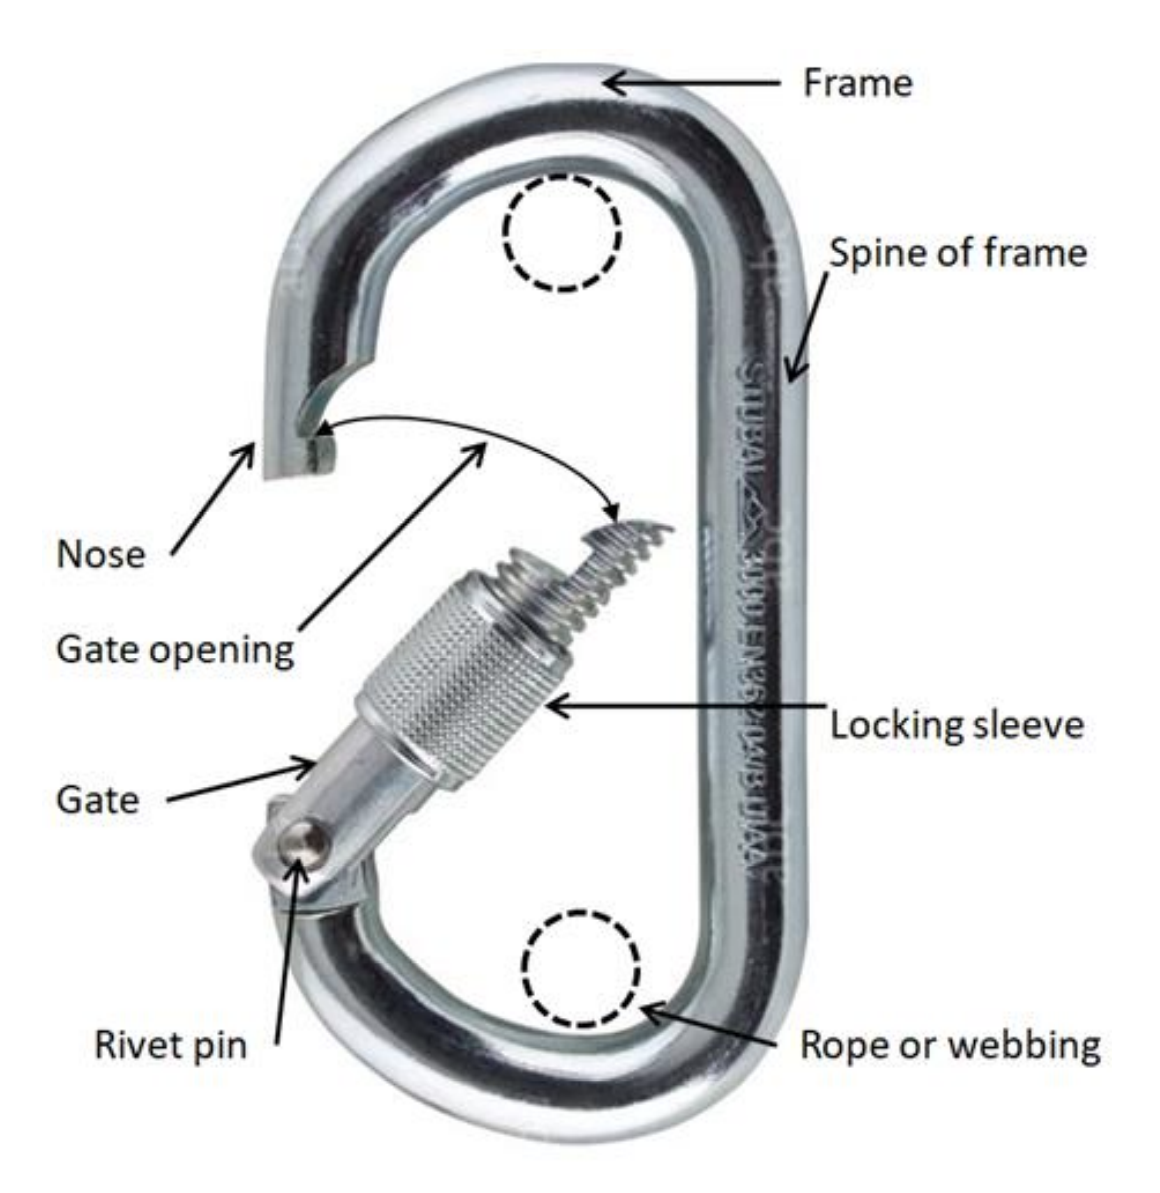 Parts of the carabiner